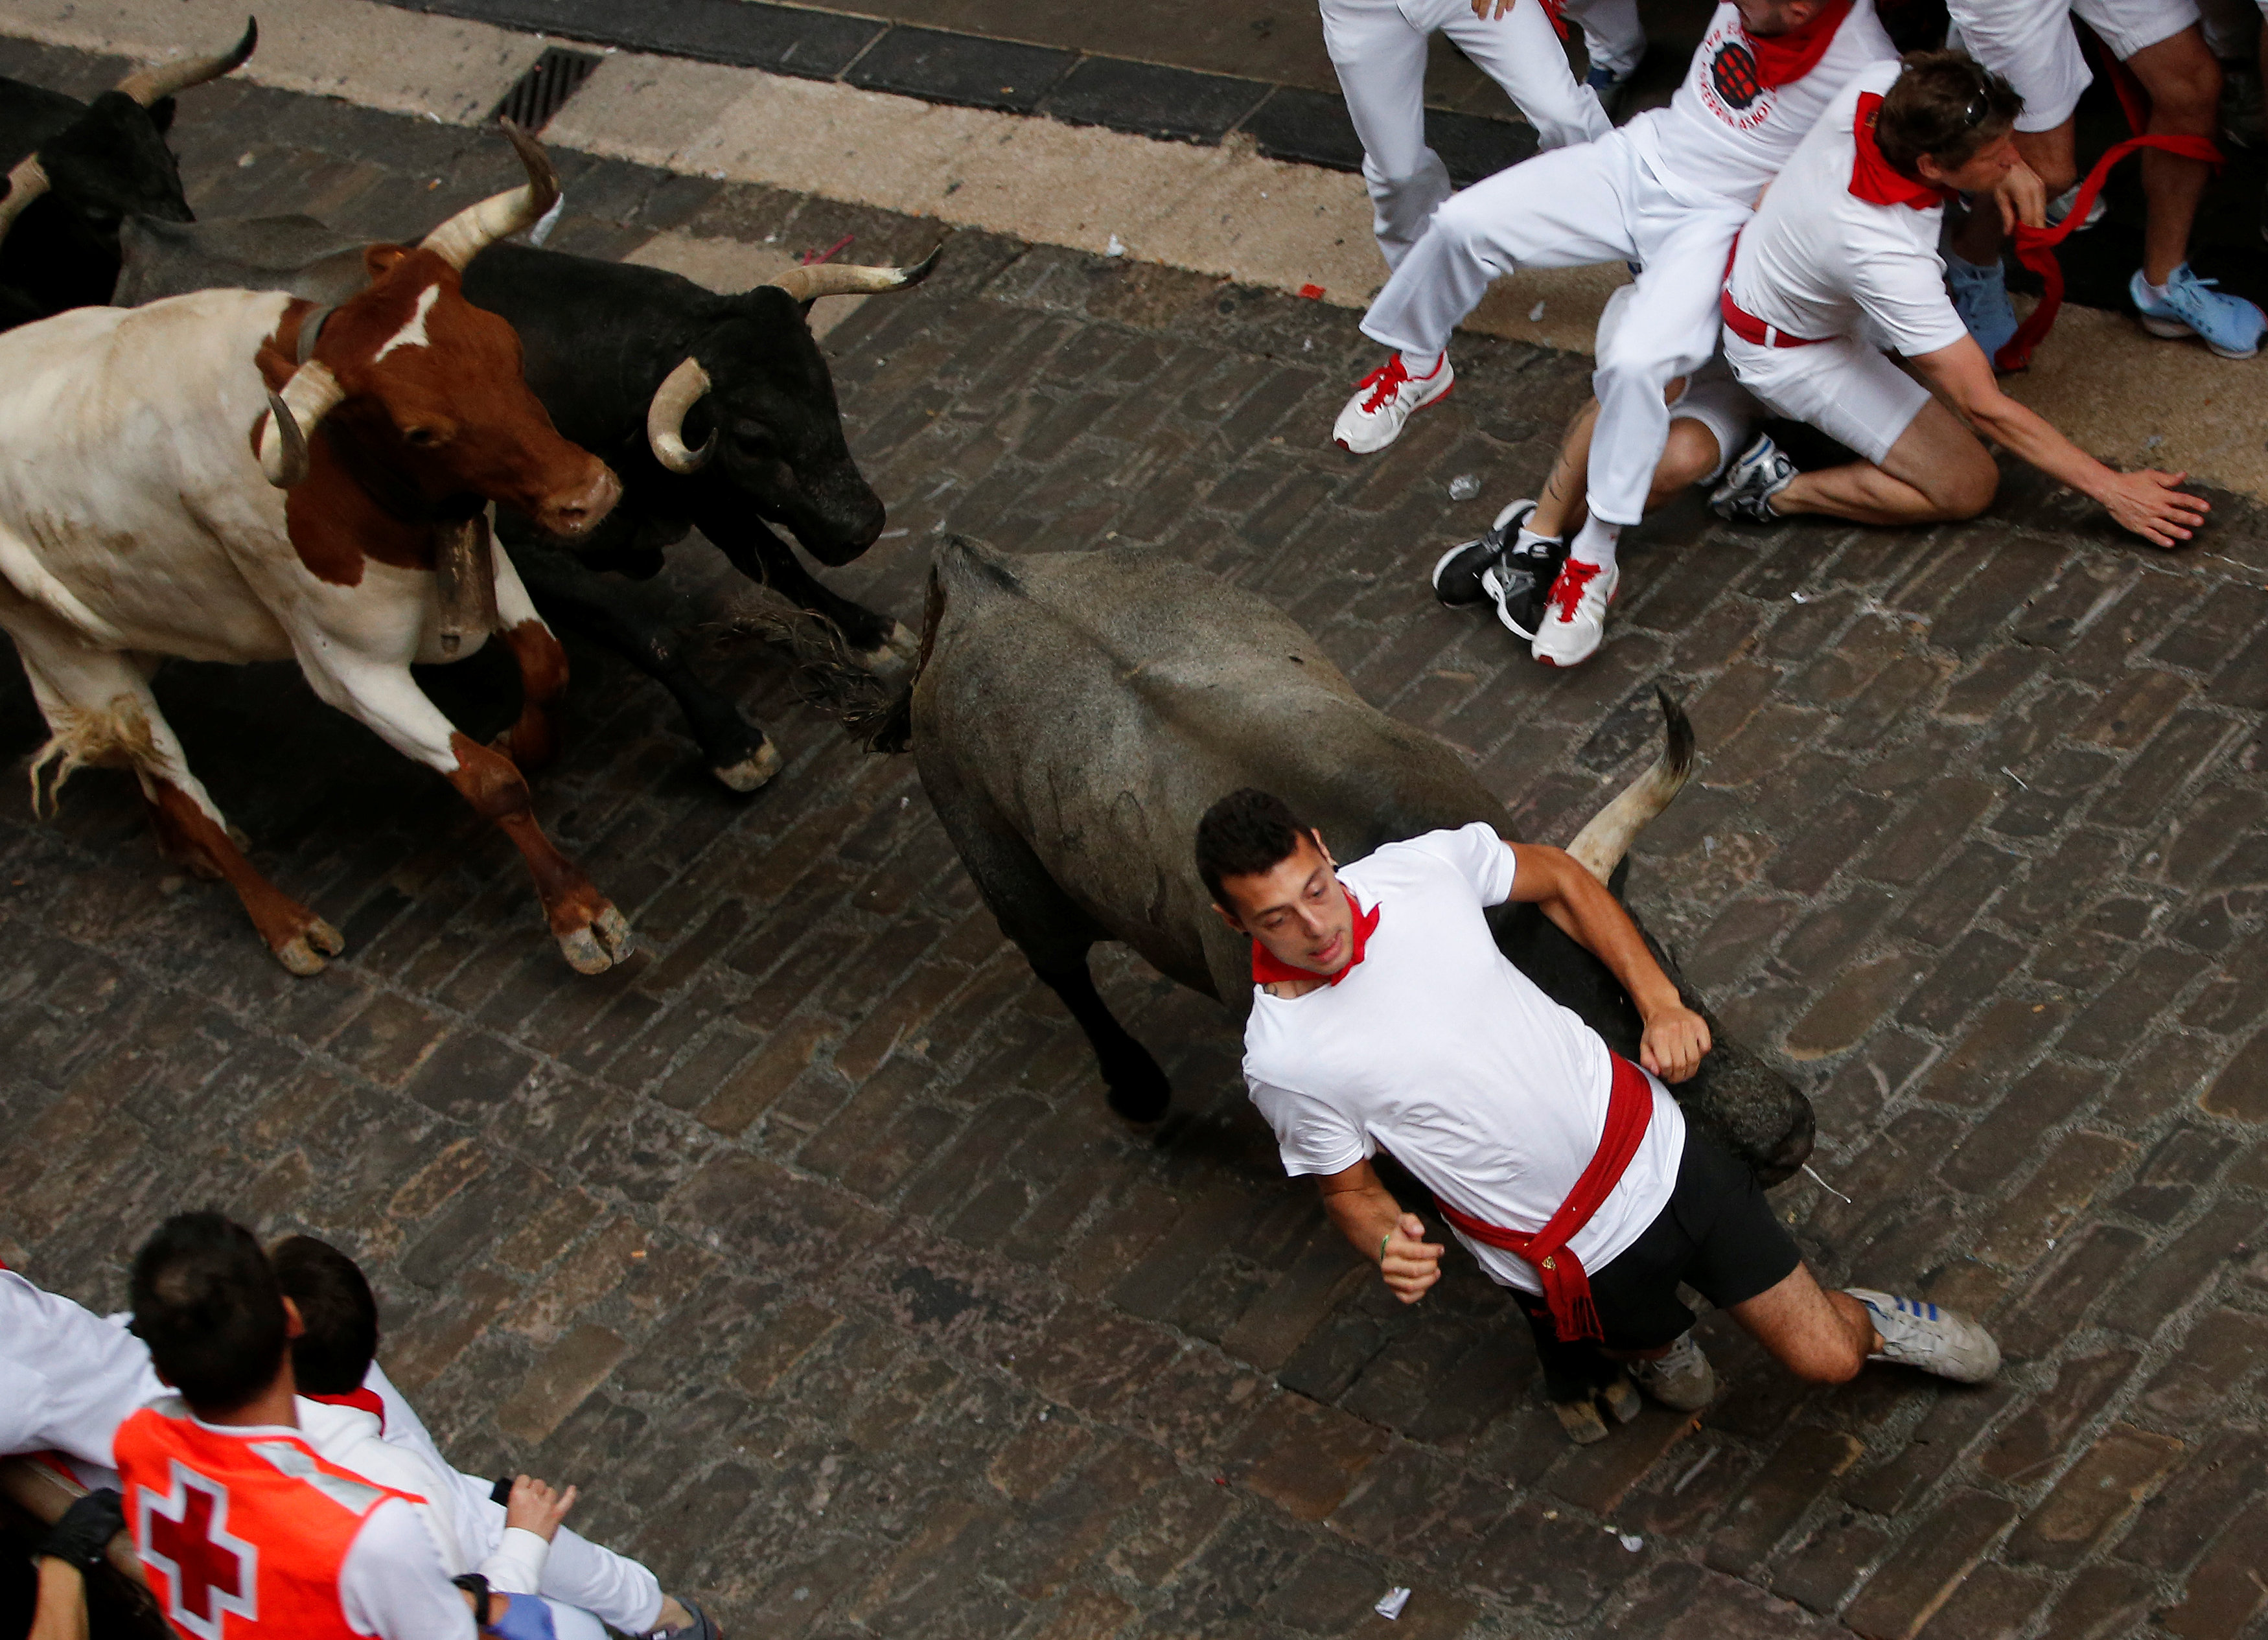 In pictures: Pamplona bull-run festival